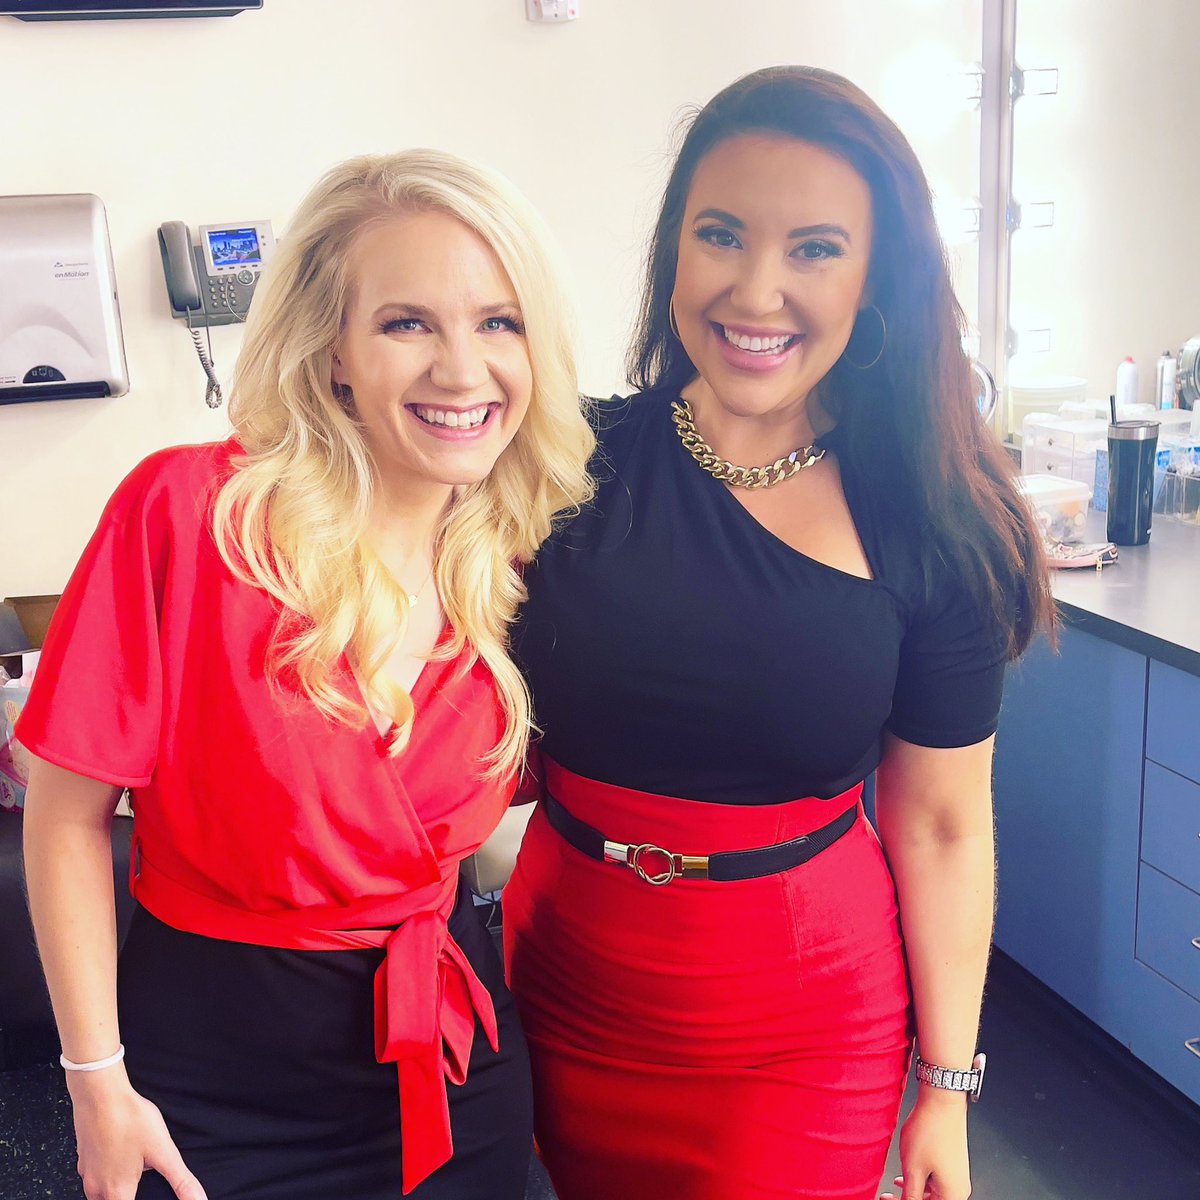 The brilliant @FeliciaCombsTWC is the yin to my yang! 😂 I was in the makeup room for a Weather Gone Viral shoot and couldn’t resist taking a photo of our yin-yang outfits! ❤️It’s always a sunny day seeing her!! ☀️

#yinyang #yinyangfashion #fashion #meteorologists #TVshoot